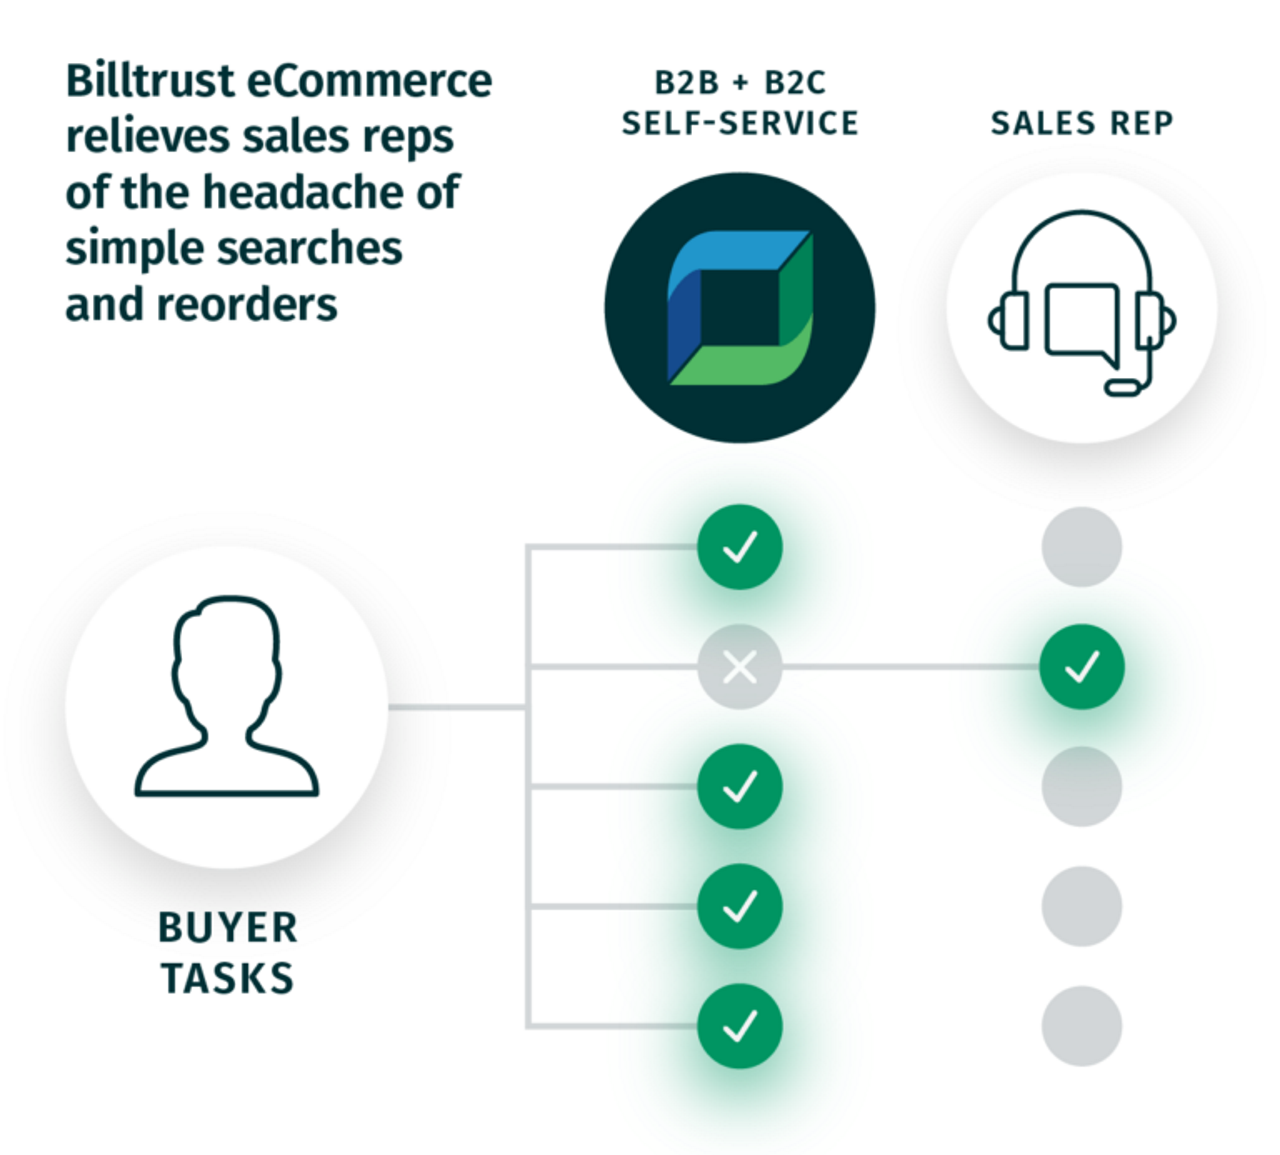 Billtrust eCommerce relieves sales reps of the headache of simple searches and reorders